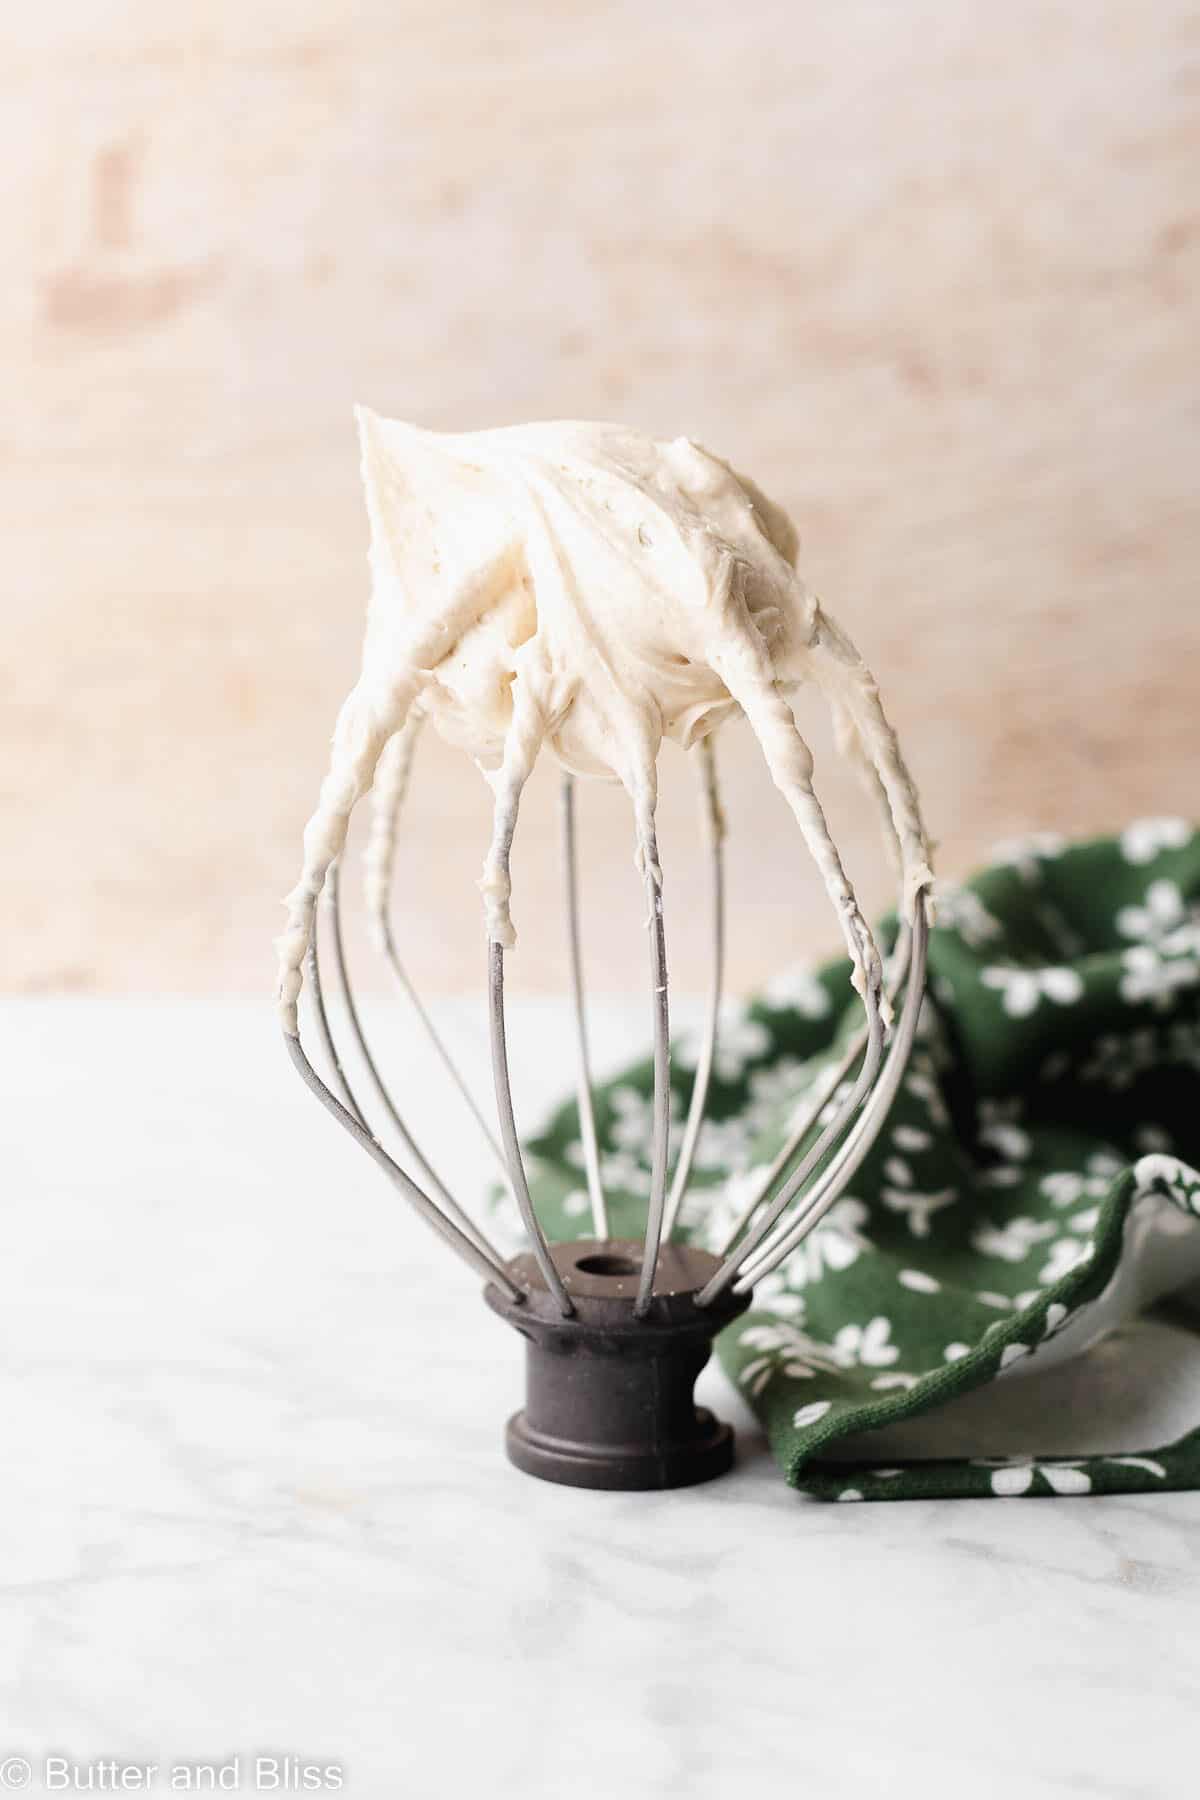 Fluffy caramel frosting made without butter on a whisk.